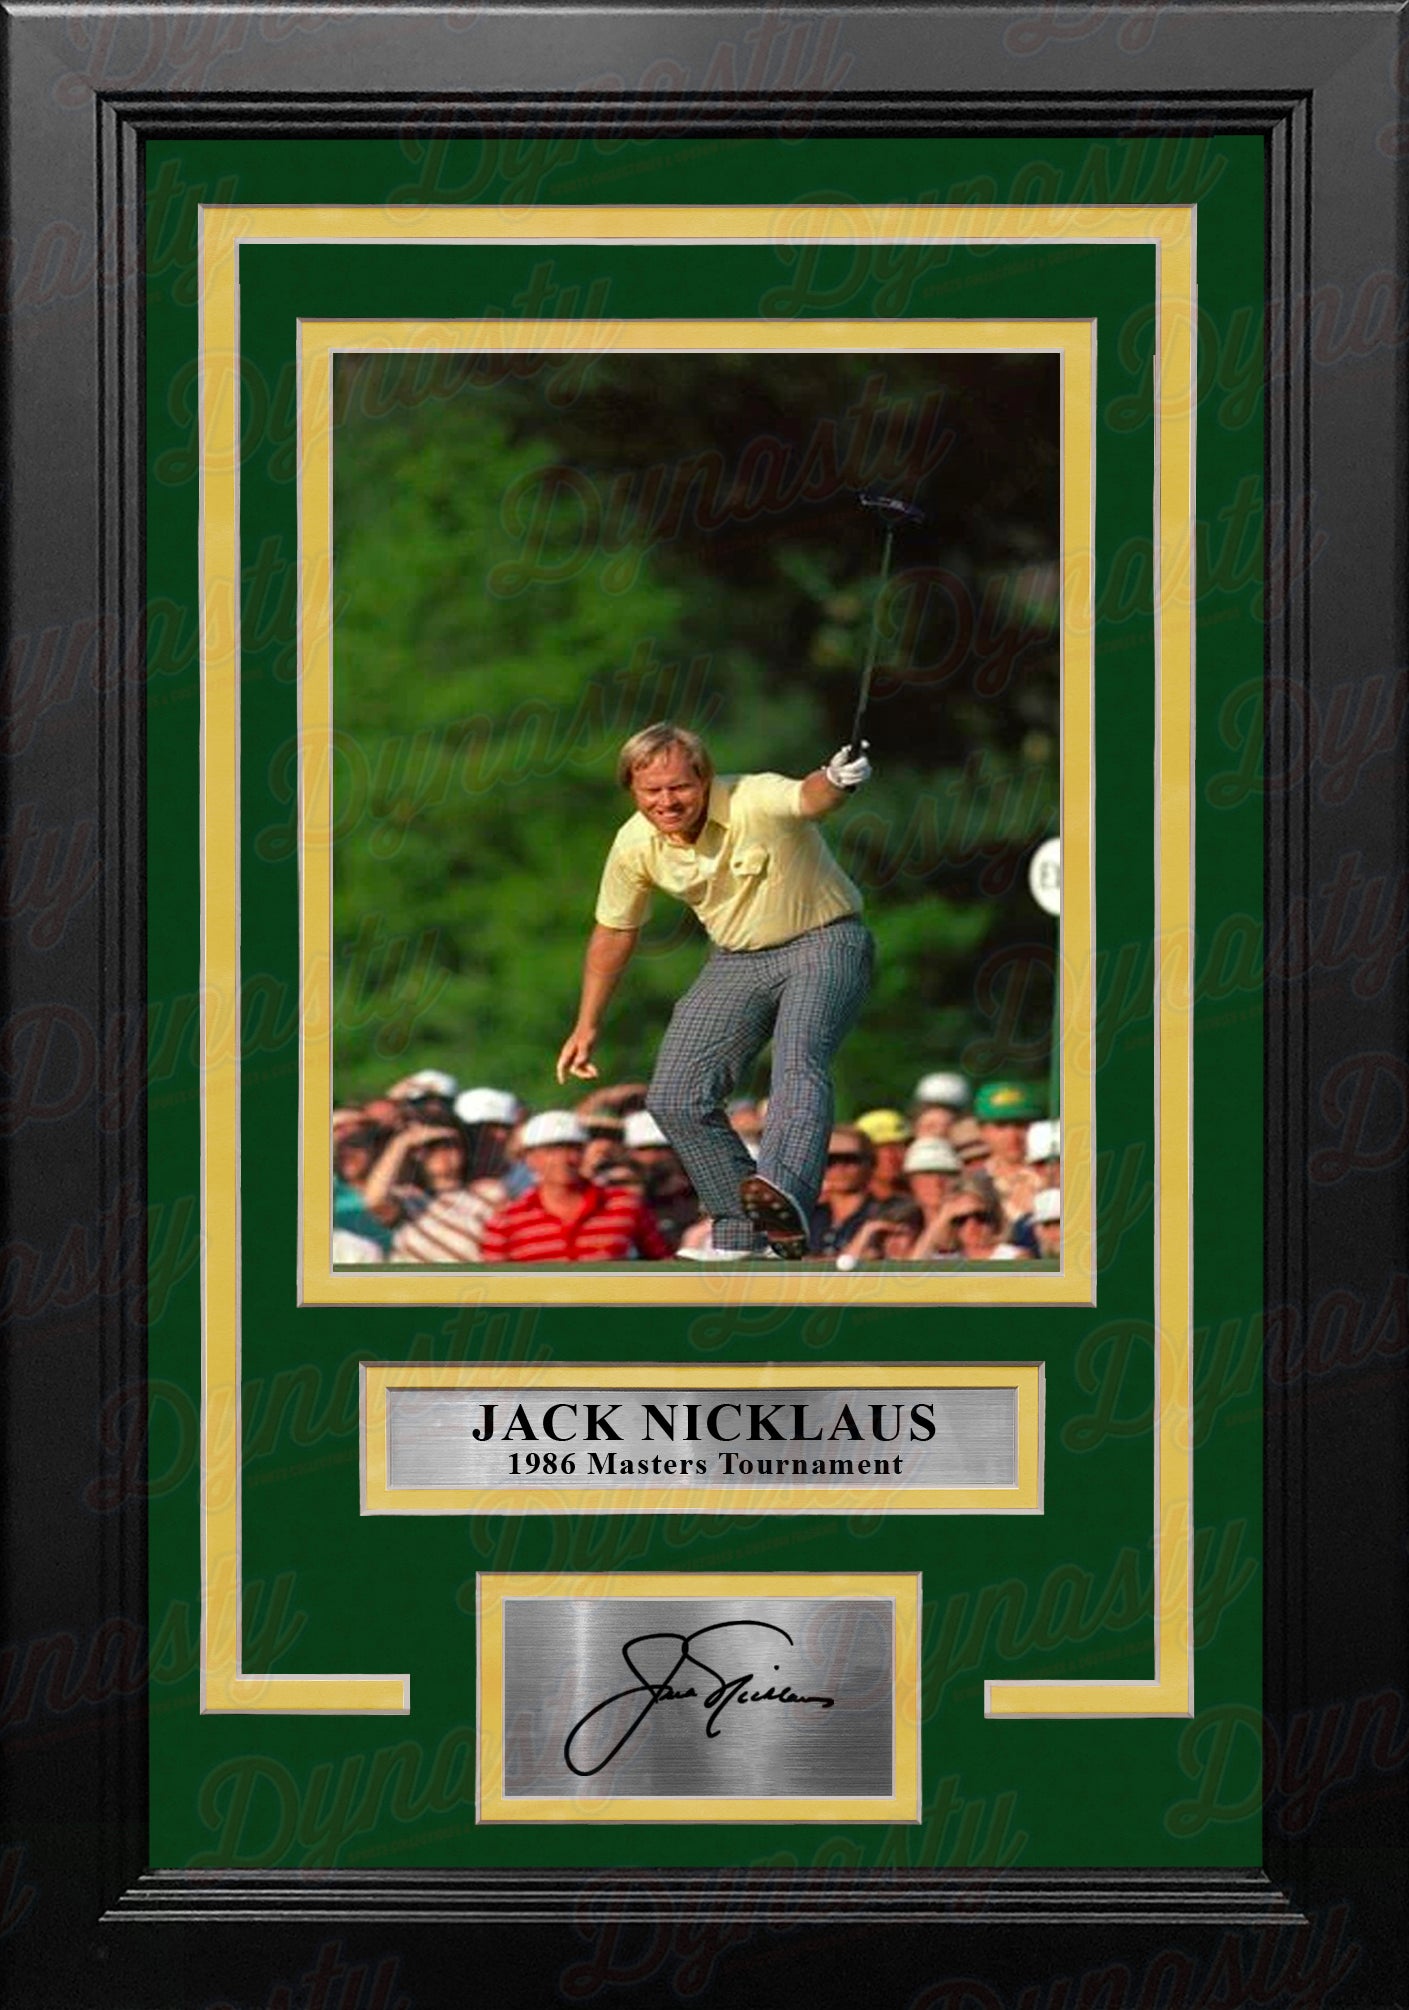 Jack Nicklaus 1986 Masters Tournament Putt on the 17th Framed Golf Photo with Engraved Autograph - Dynasty Sports & Framing 